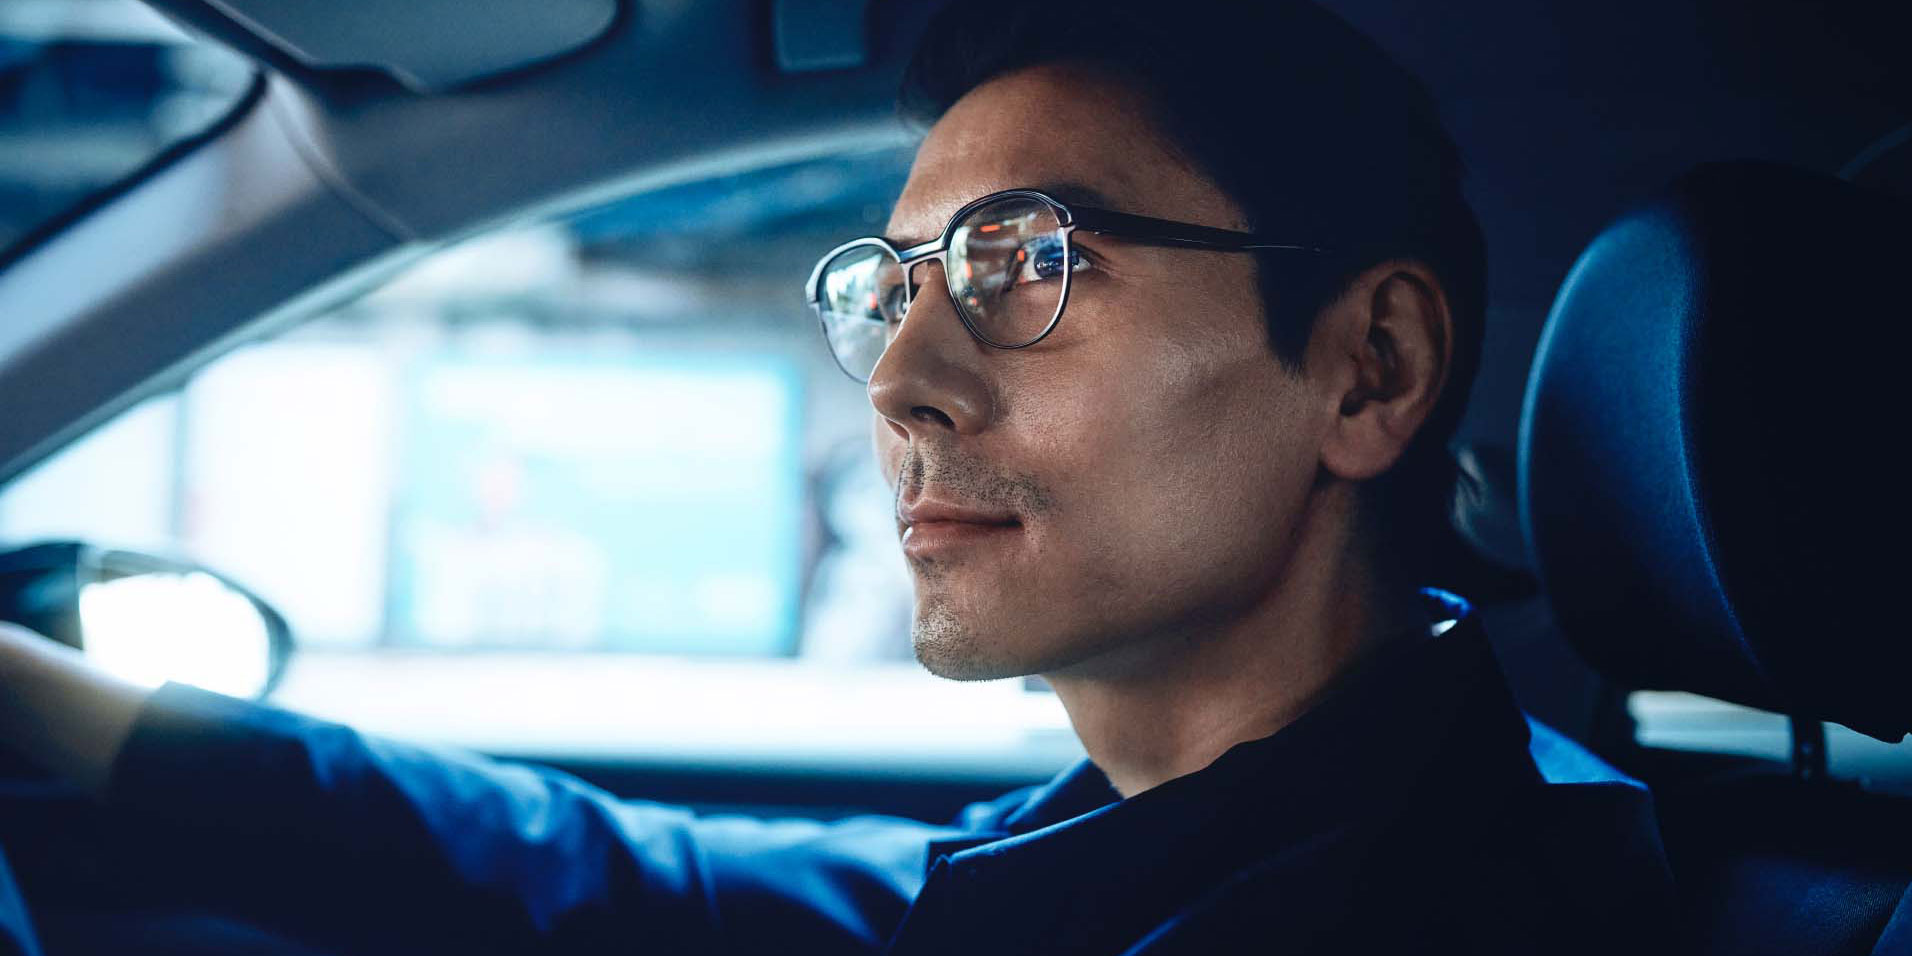 The best glasses for driving - Reach your destination safely